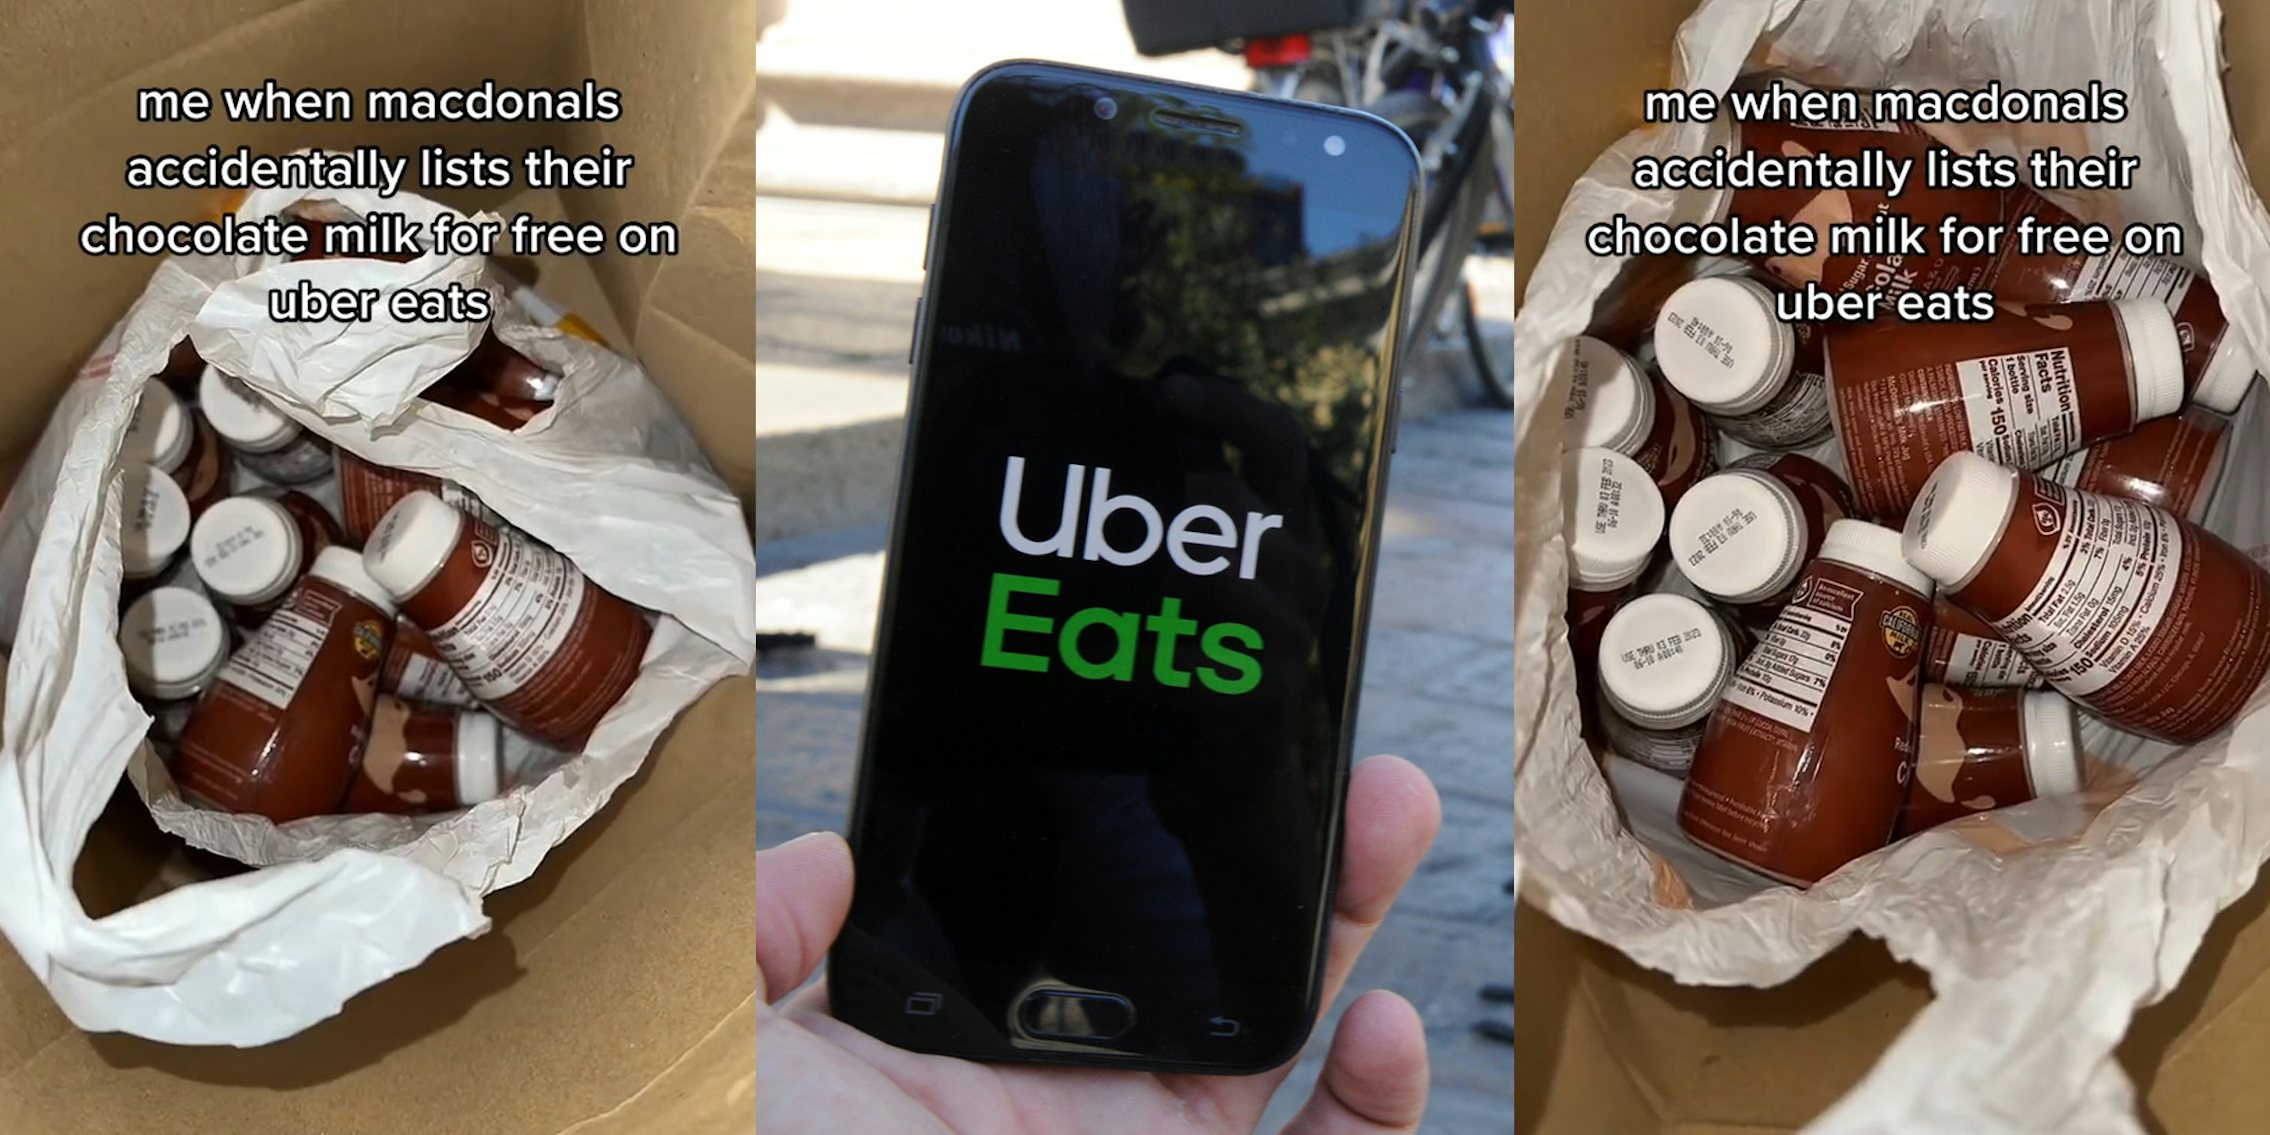 bag with chocolate milk in bottles with caption 'me when macdonals accidentally lists their chocolate milk for free on uber eats' (l) Uber ats on phone in hand outside (c) bag with chocolate milk in bottles with caption 'me when macdonals accidentally lists their chocolate milk for free on uber eats' (r)